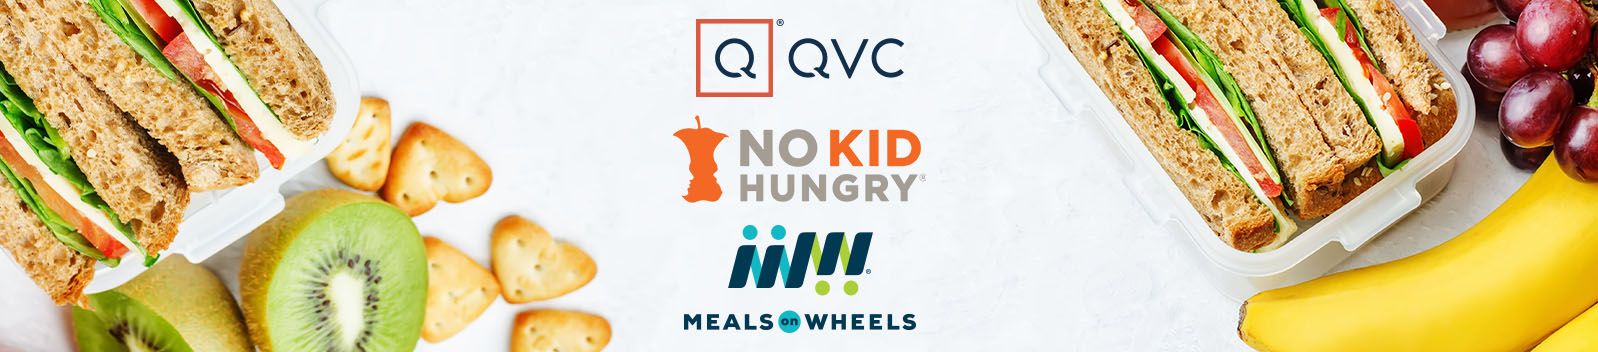 QVC + No Kid Hungry + Meals on Wheels